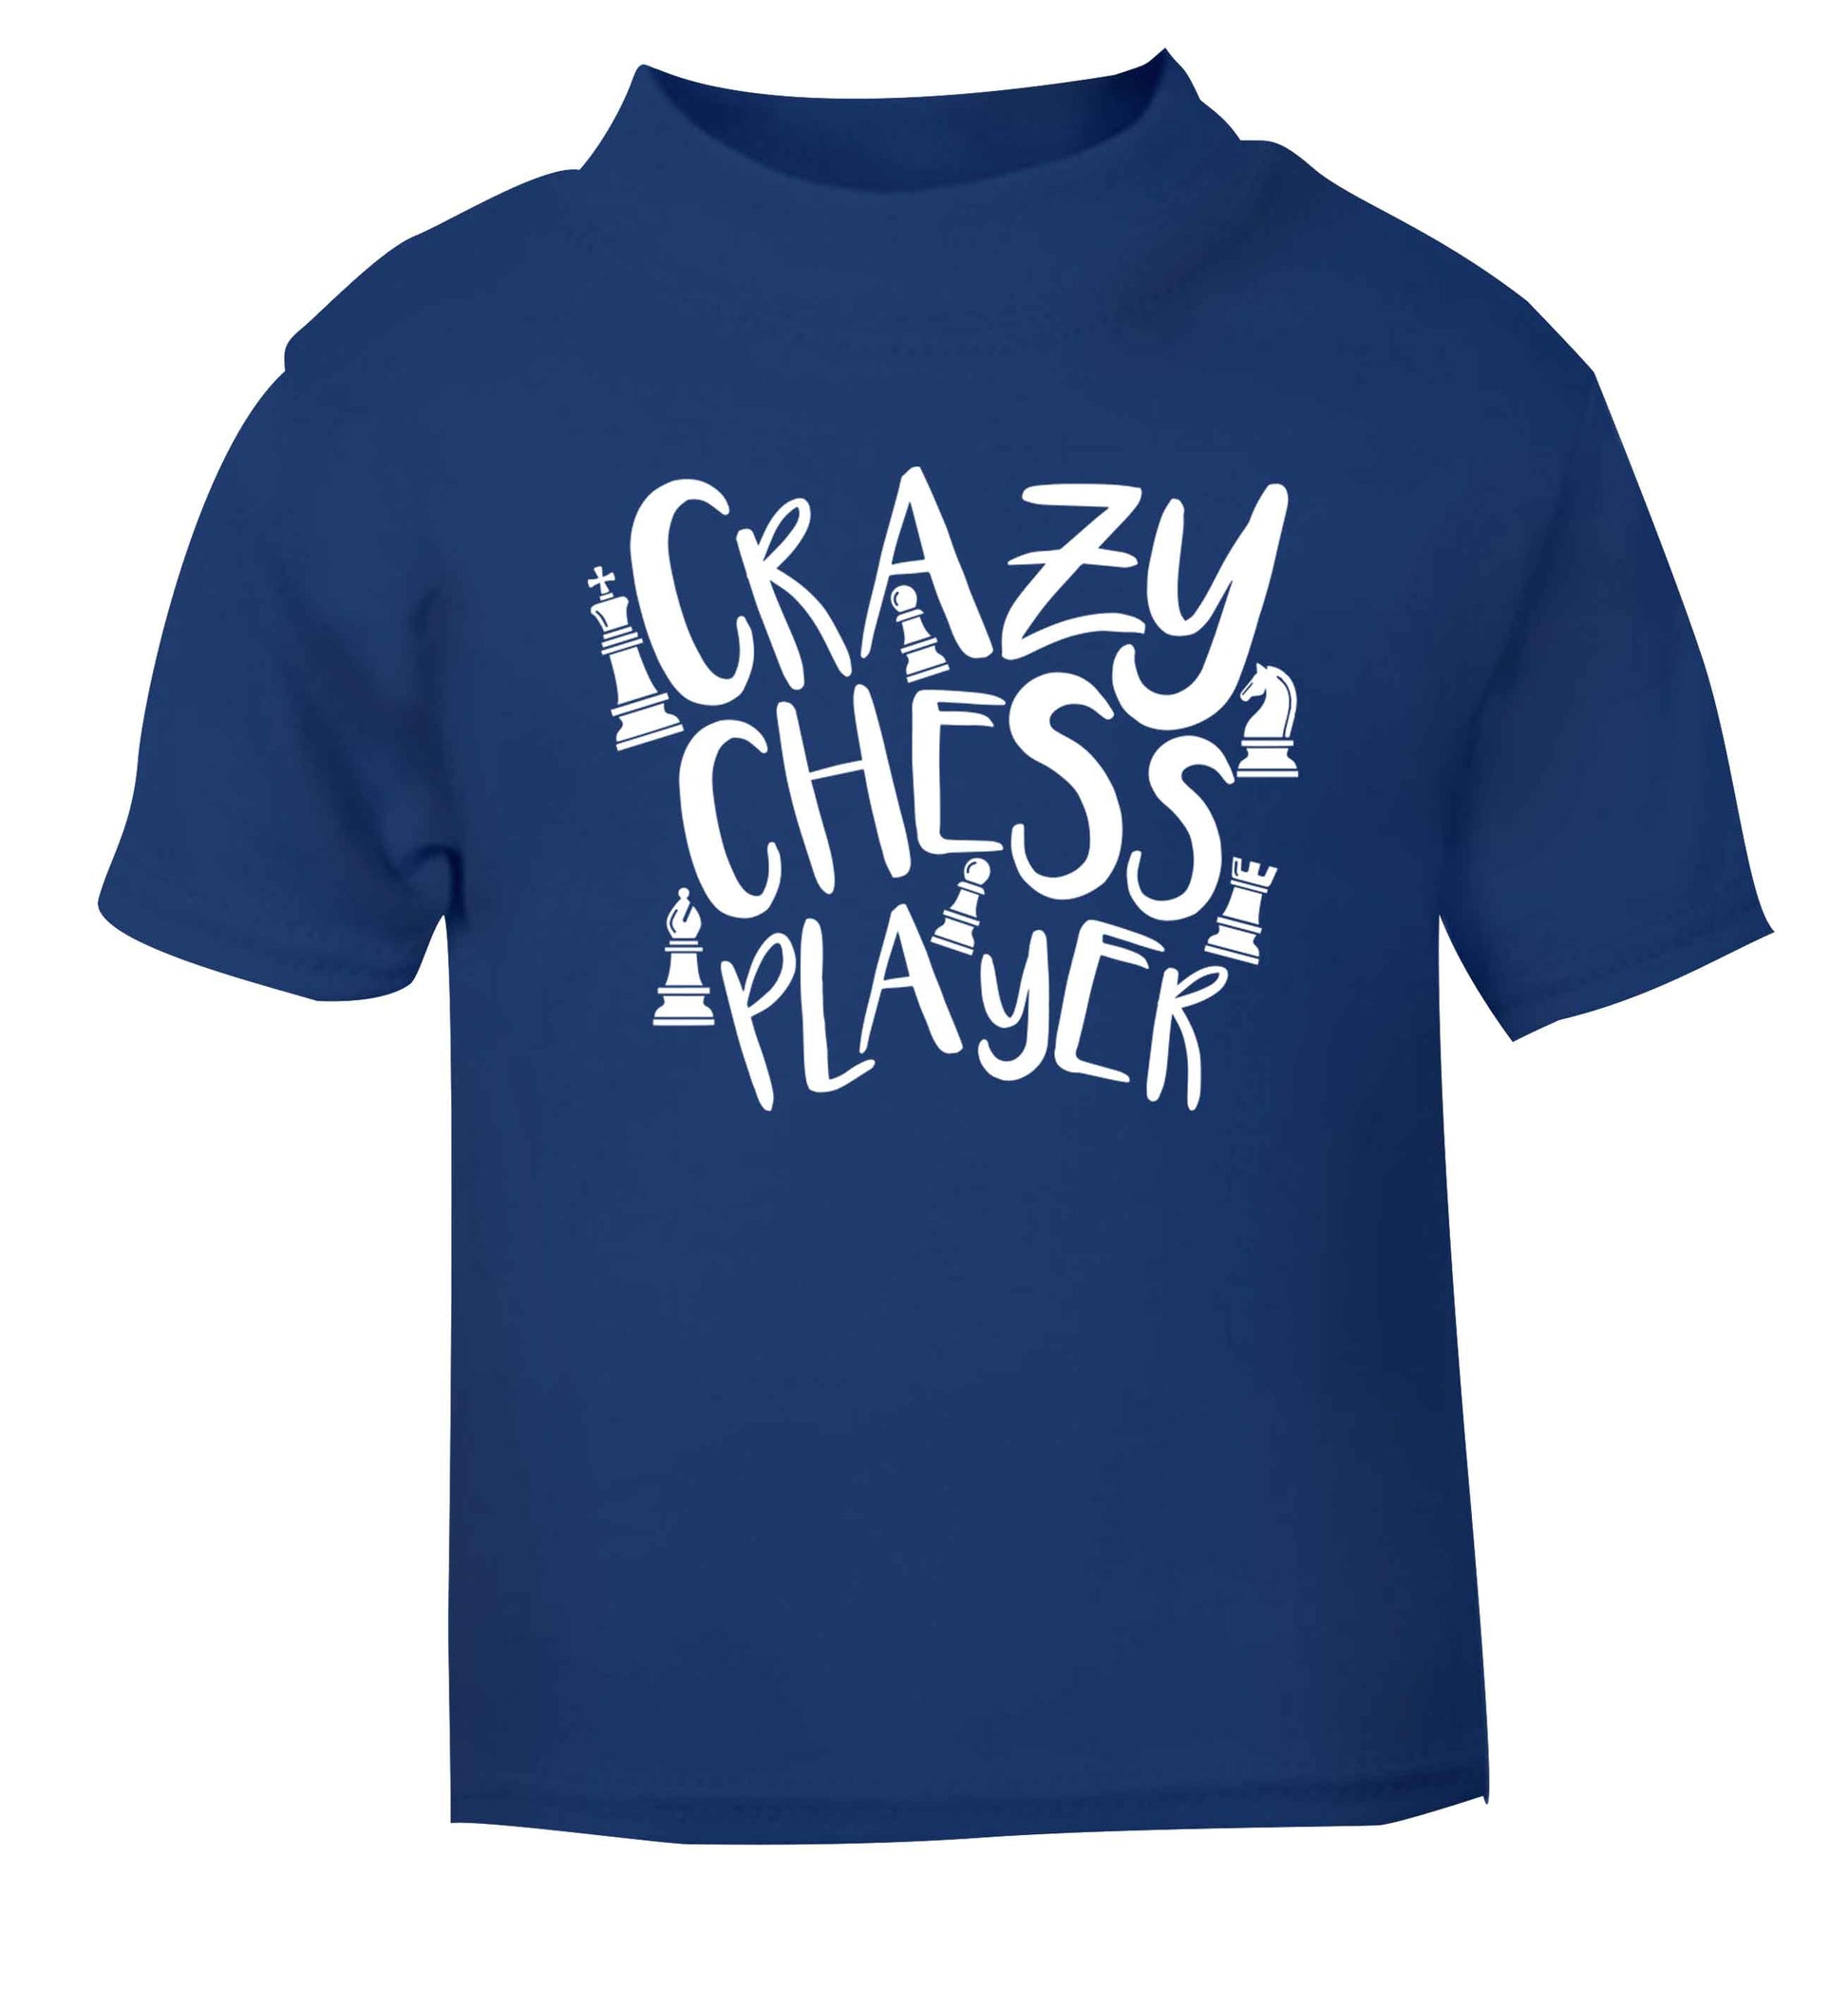 Crazy chess player blue Baby Toddler Tshirt 2 Years